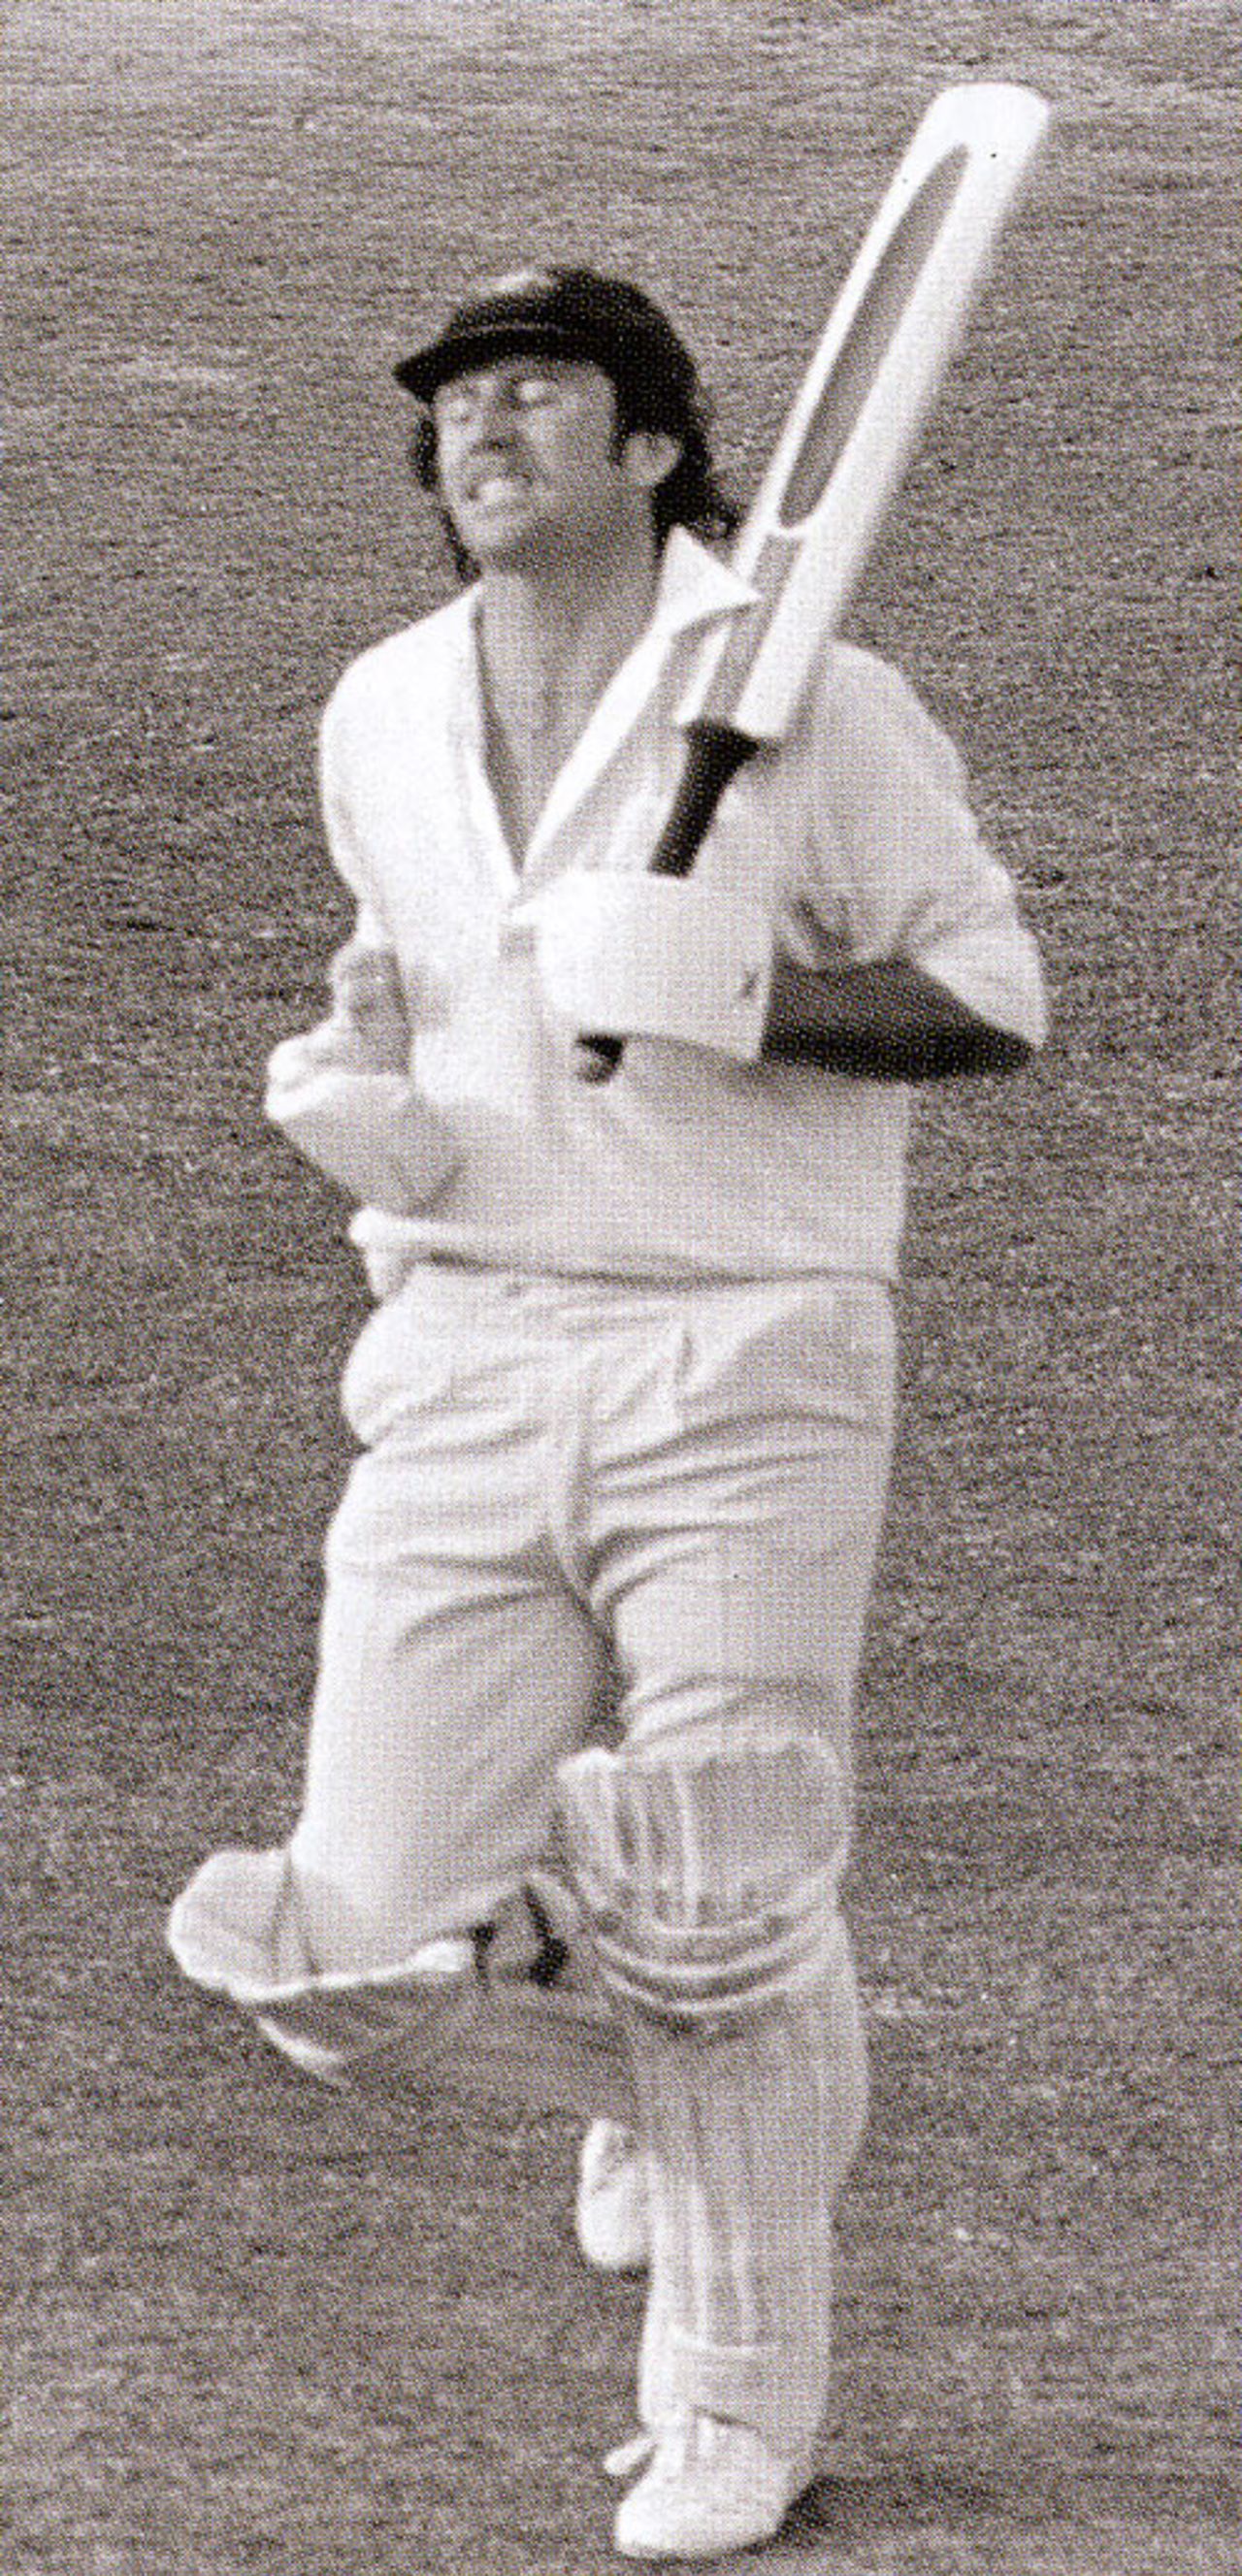 Ian Chappell grimaces after being run out in the World Cup final, West Indies v Australia, Lord's, June 21, 1975